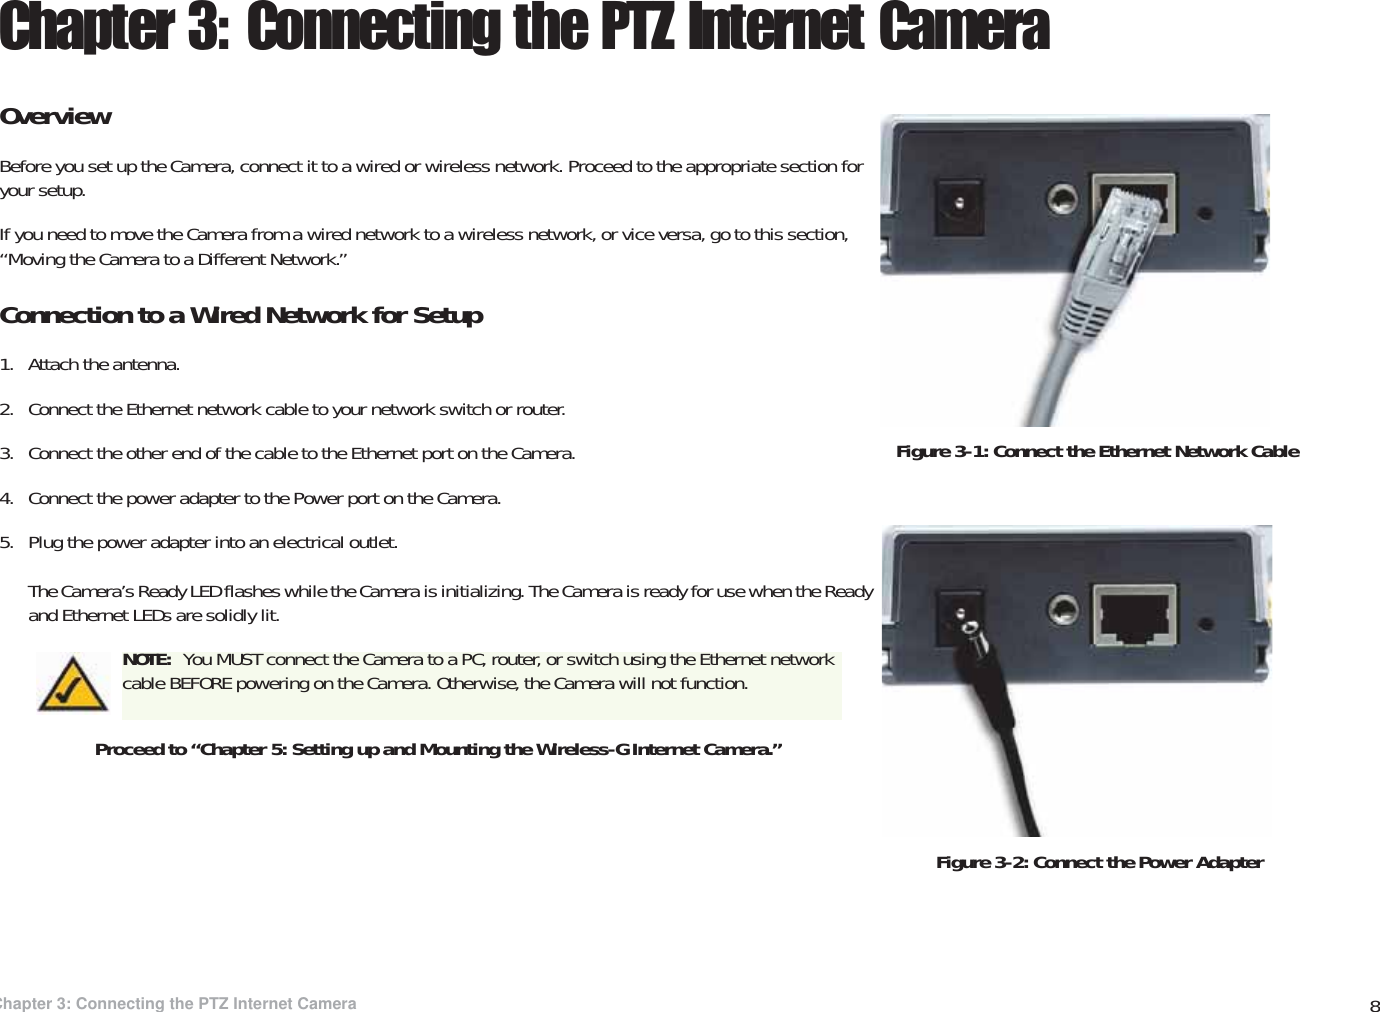 8Chapter 3: Connecting the PTZ Internet CameraOverviewWireless-G PTZ Internet Video Camera with AudioChapter 3: Connecting the PTZ Internet CameraOverviewBefore you set up the Camera, connect it to a wired or wireless network. Proceed to the appropriate section for your setup.If you need to move the Camera from a wired network to a wireless network, or vice versa, go to this section, “Moving the Camera to a Different Network.”Connection to a Wired Network for Setup1. Attach the antenna.2. Connect the Ethernet network cable to your network switch or router.3. Connect the other end of the cable to the Ethernet port on the Camera.4. Connect the power adapter to the Power port on the Camera.5. Plug the power adapter into an electrical outlet.The Camera’s Ready LED flashes while the Camera is initializing. The Camera is ready for use when the Ready and Ethernet LEDs are solidly lit.Proceed to “Chapter 5: Setting up and Mounting the Wireless-G Internet Camera.”NOTE:  You MUST connect the Camera to a PC, router, or switch using the Ethernet network cable BEFORE powering on the Camera. Otherwise, the Camera will not function.Figure 3-2: Connect the Power AdapterFigure 3-1: Connect the Ethernet Network Cable